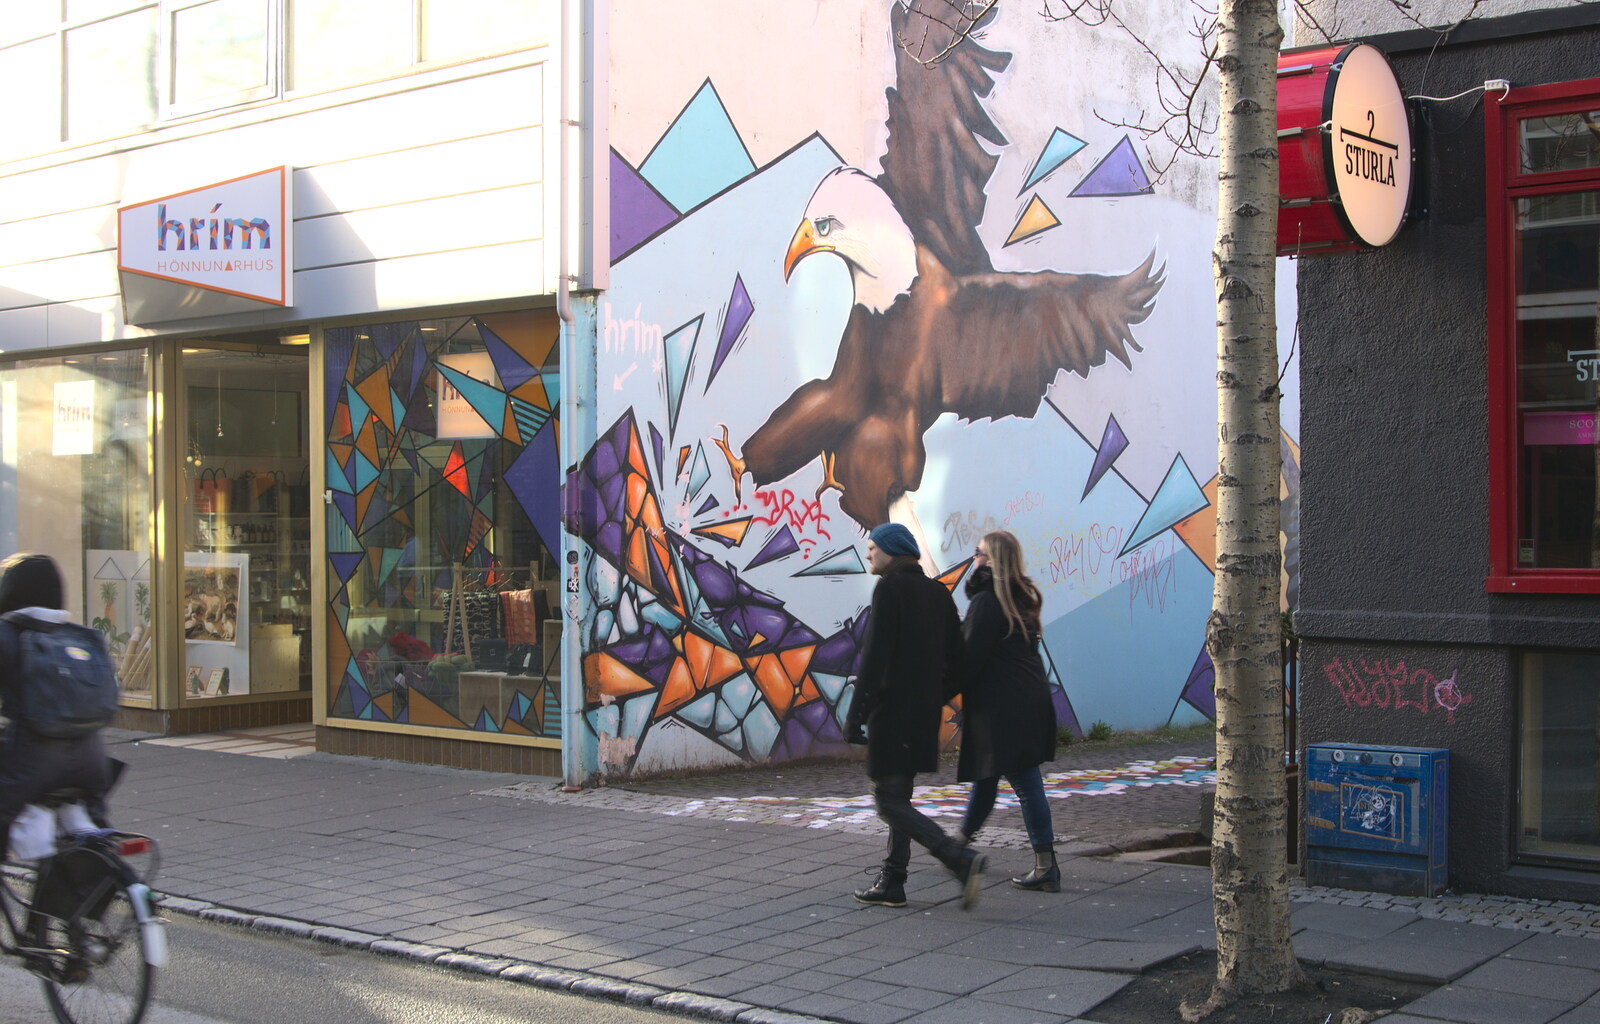 Eagles are clearly popular from A Trip to Reykjavik, Iceland - 20th April 2017